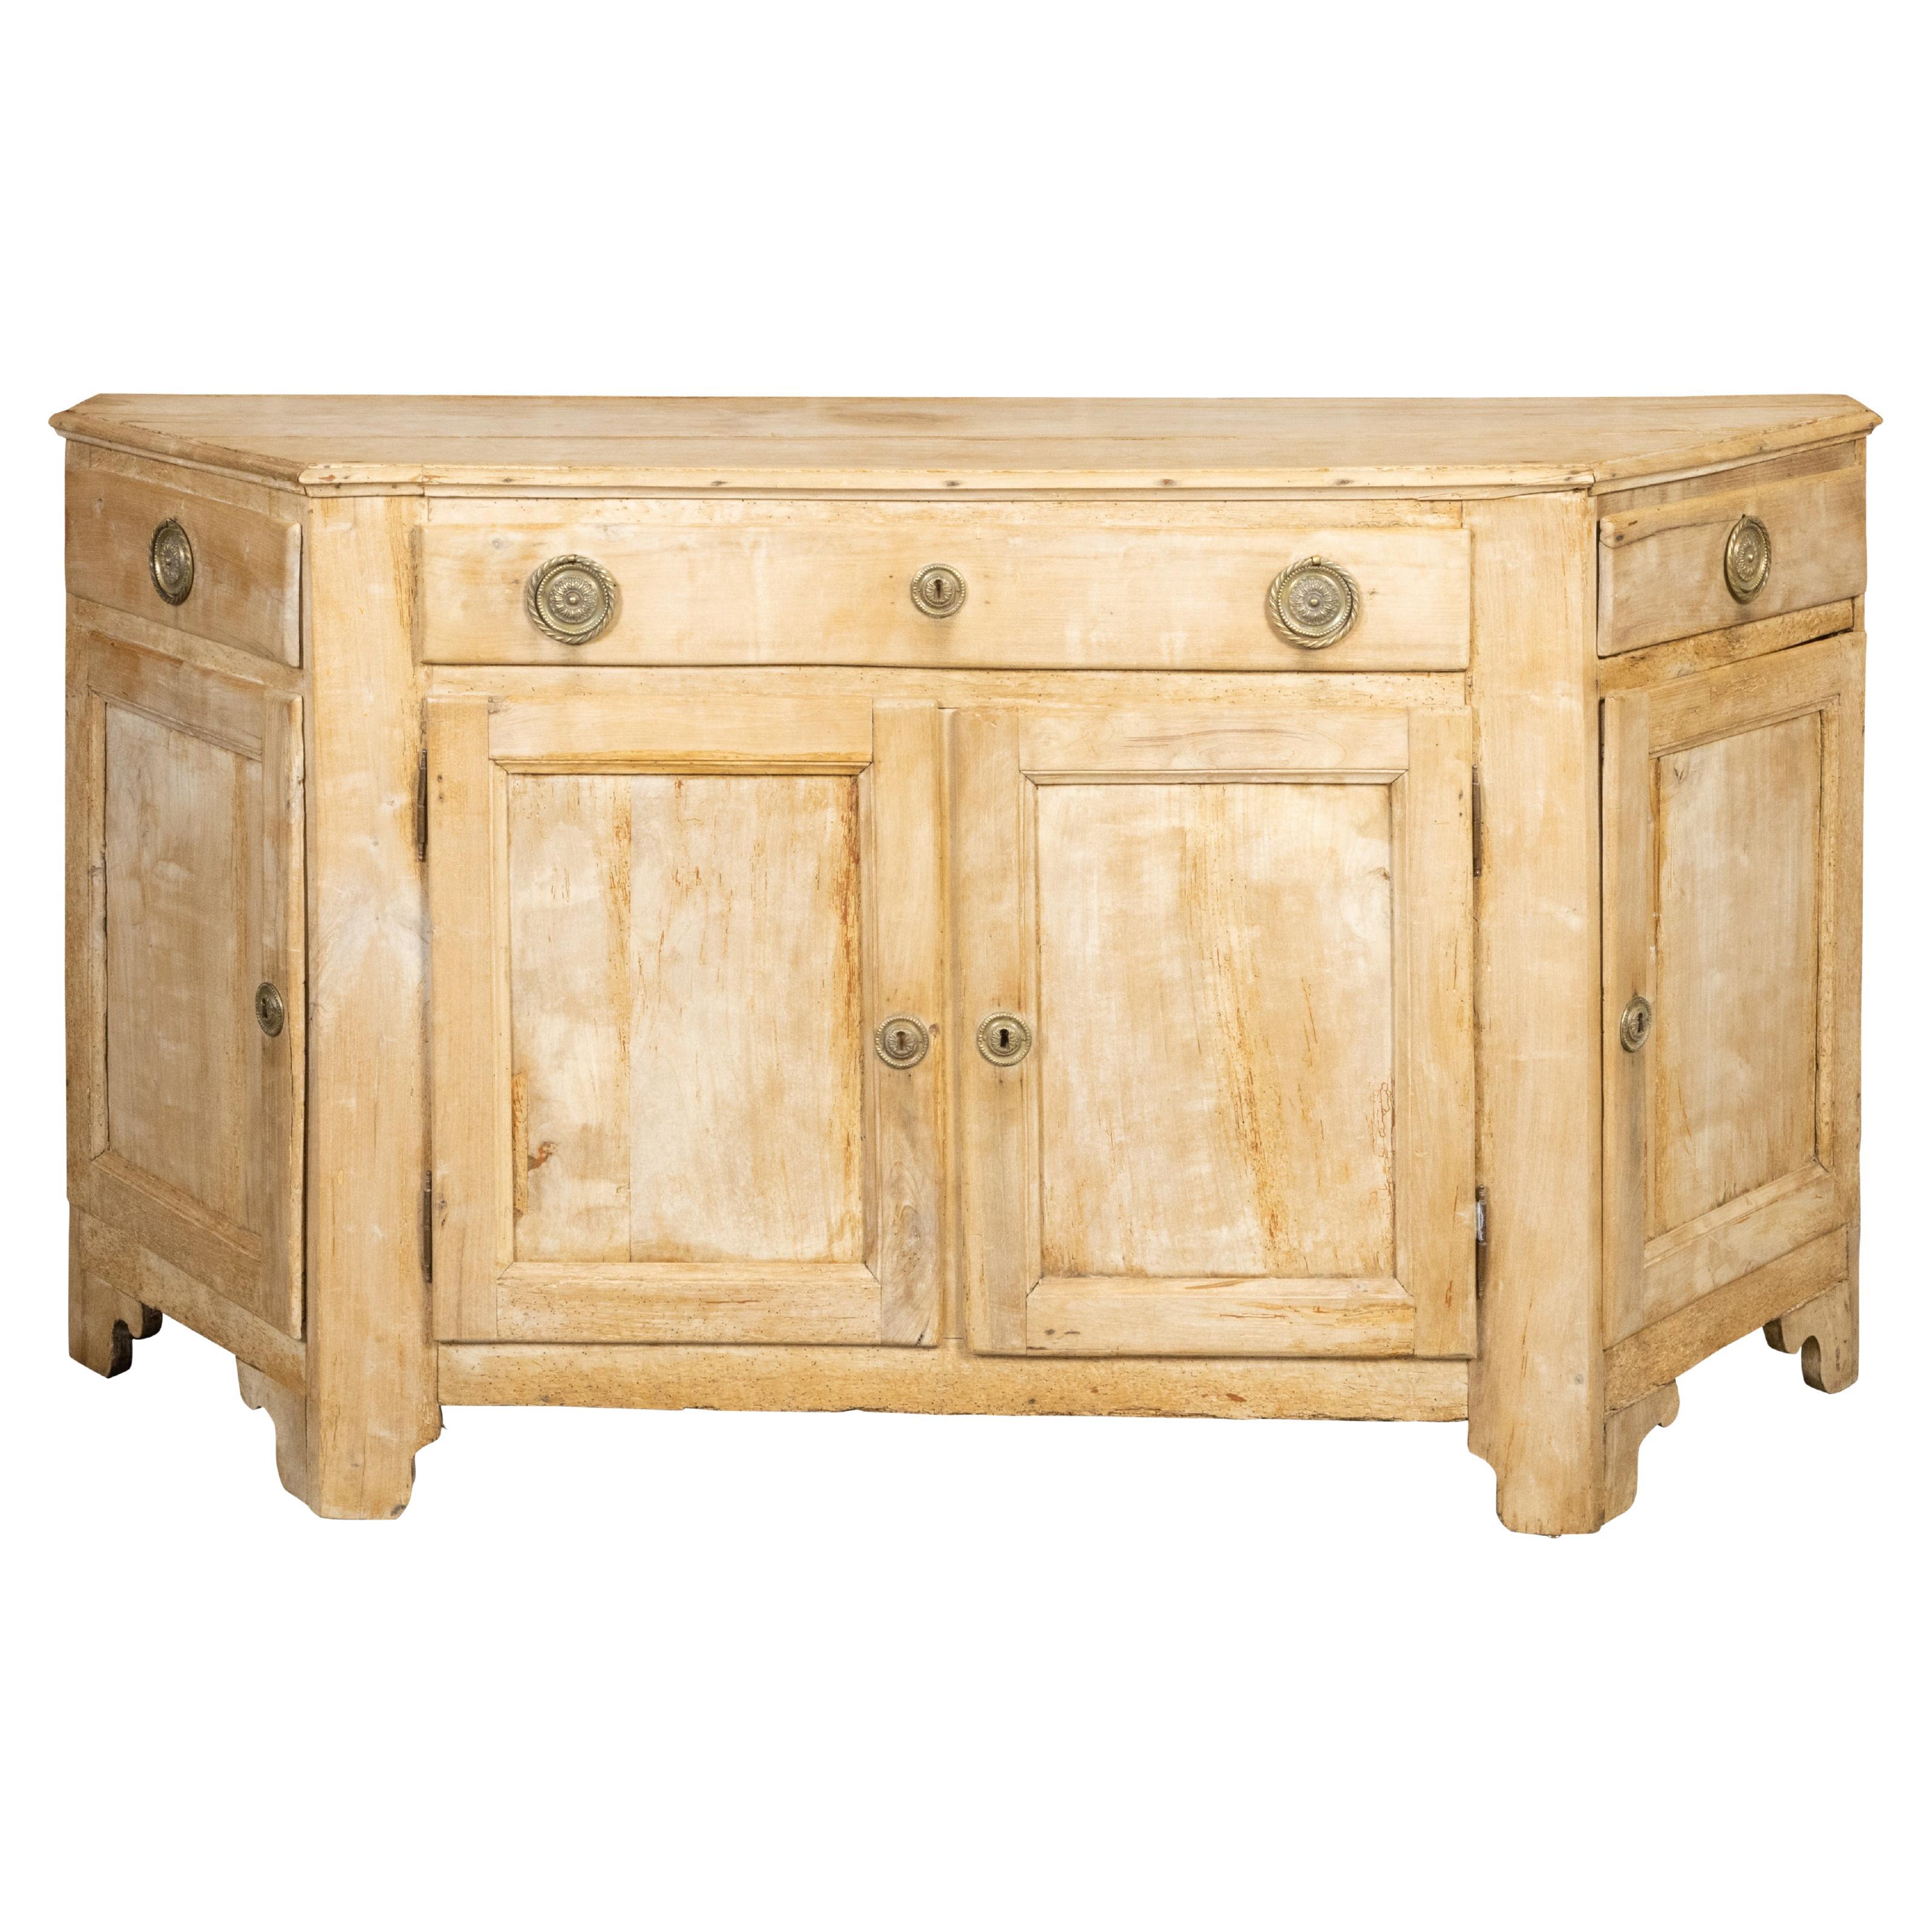 Italian Early 19th Century Bleached Credenza with Canted Sides Doors and Drawers For Sale